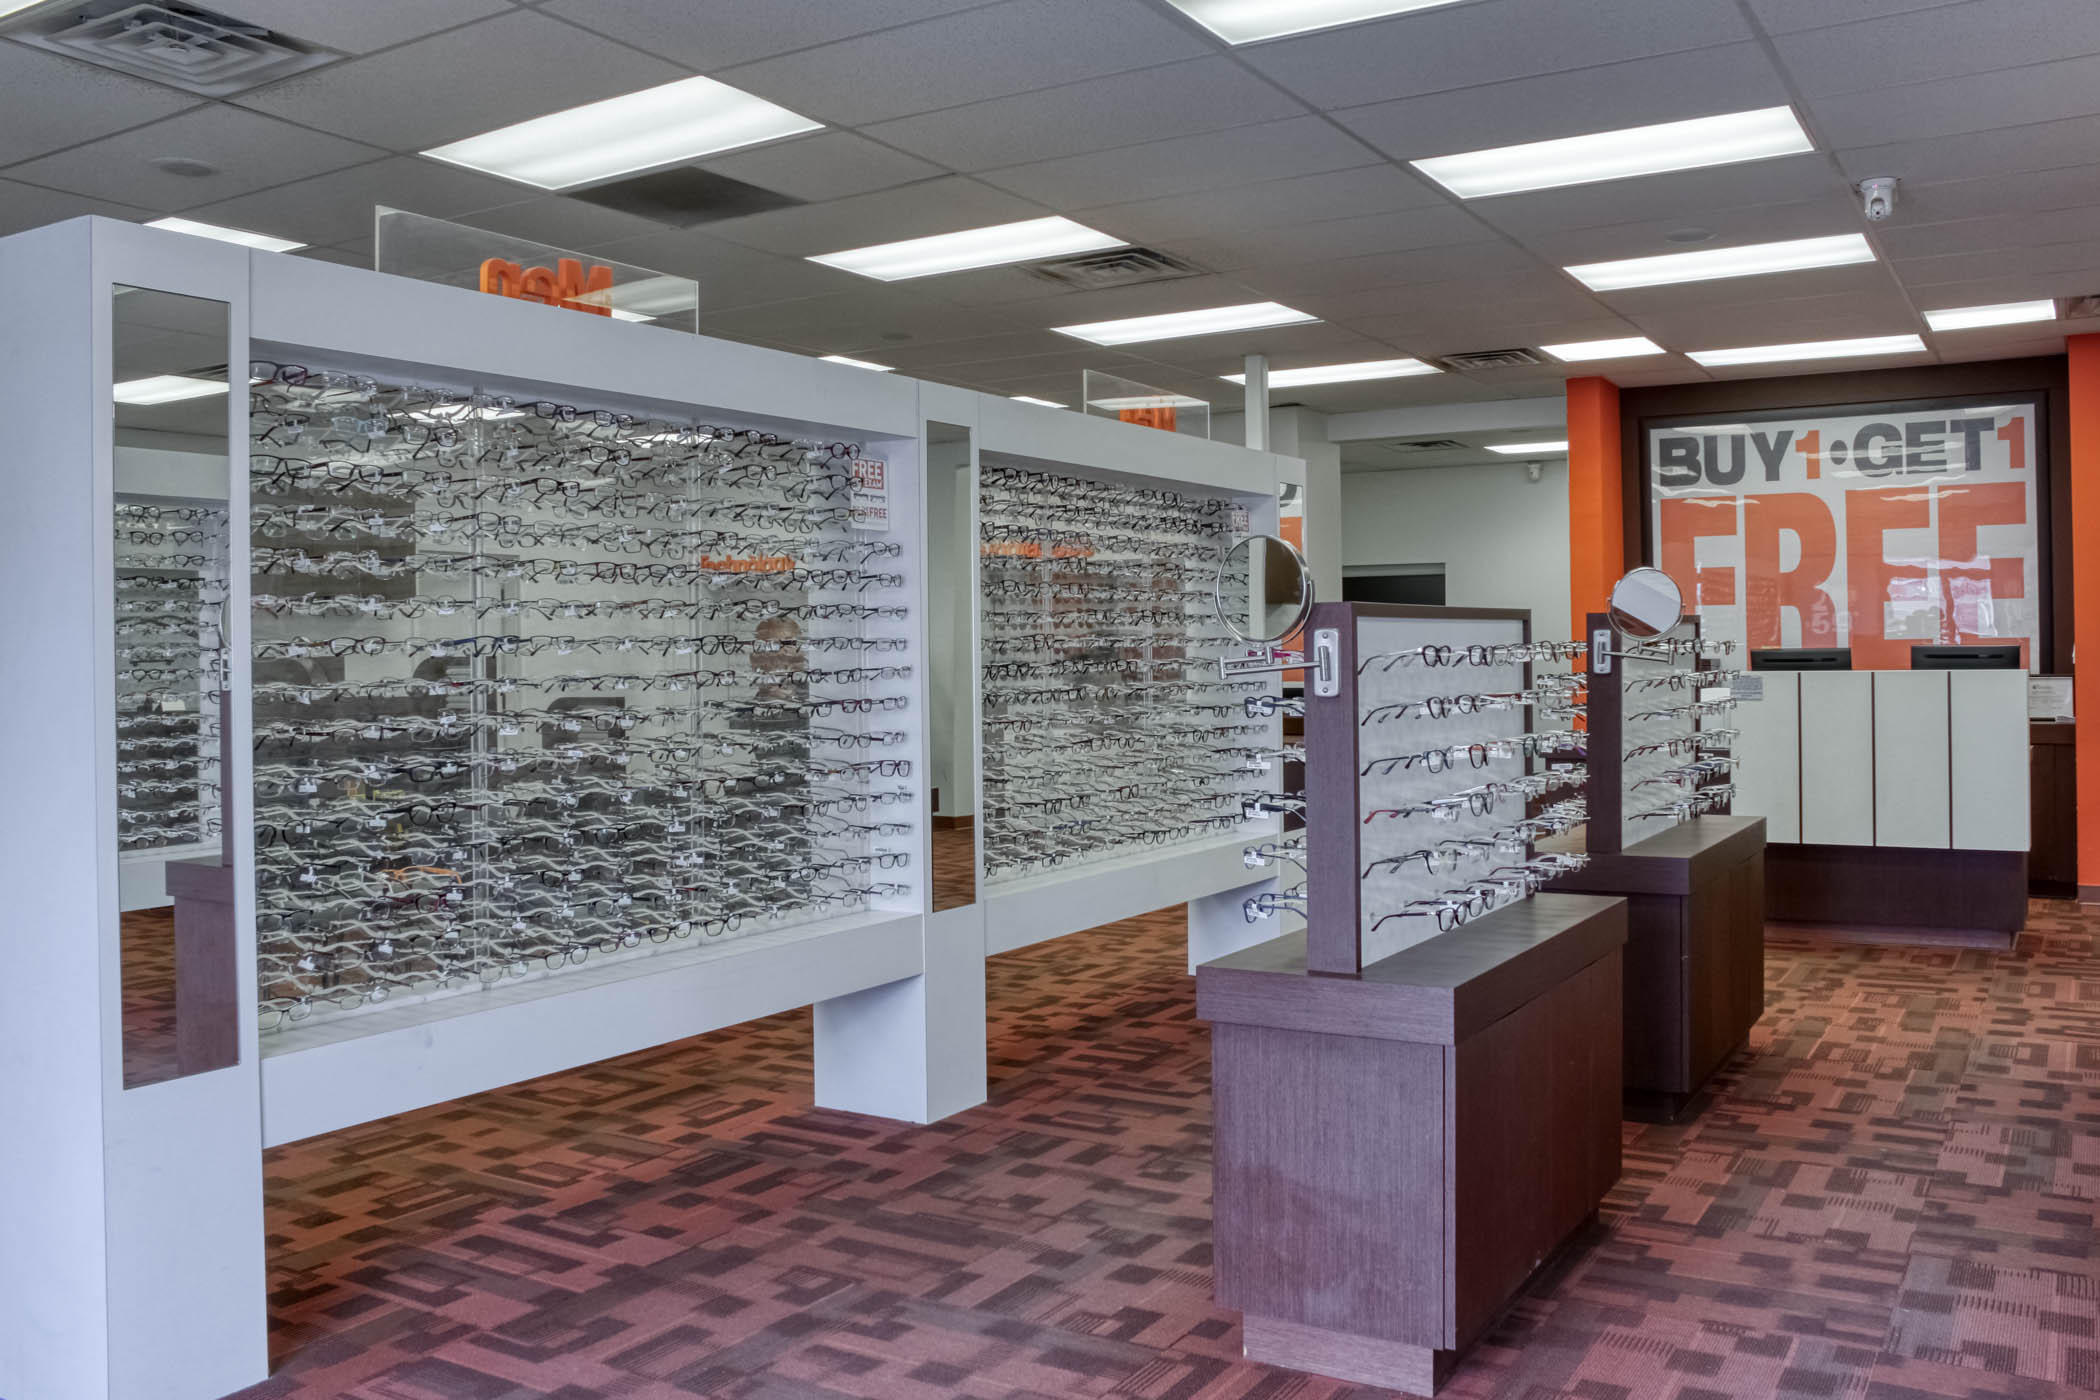 Eyeglasses for sale at Stanton Optical store in Lubbock, TX 79414 Stanton Optical Lubbock (806)305-9420